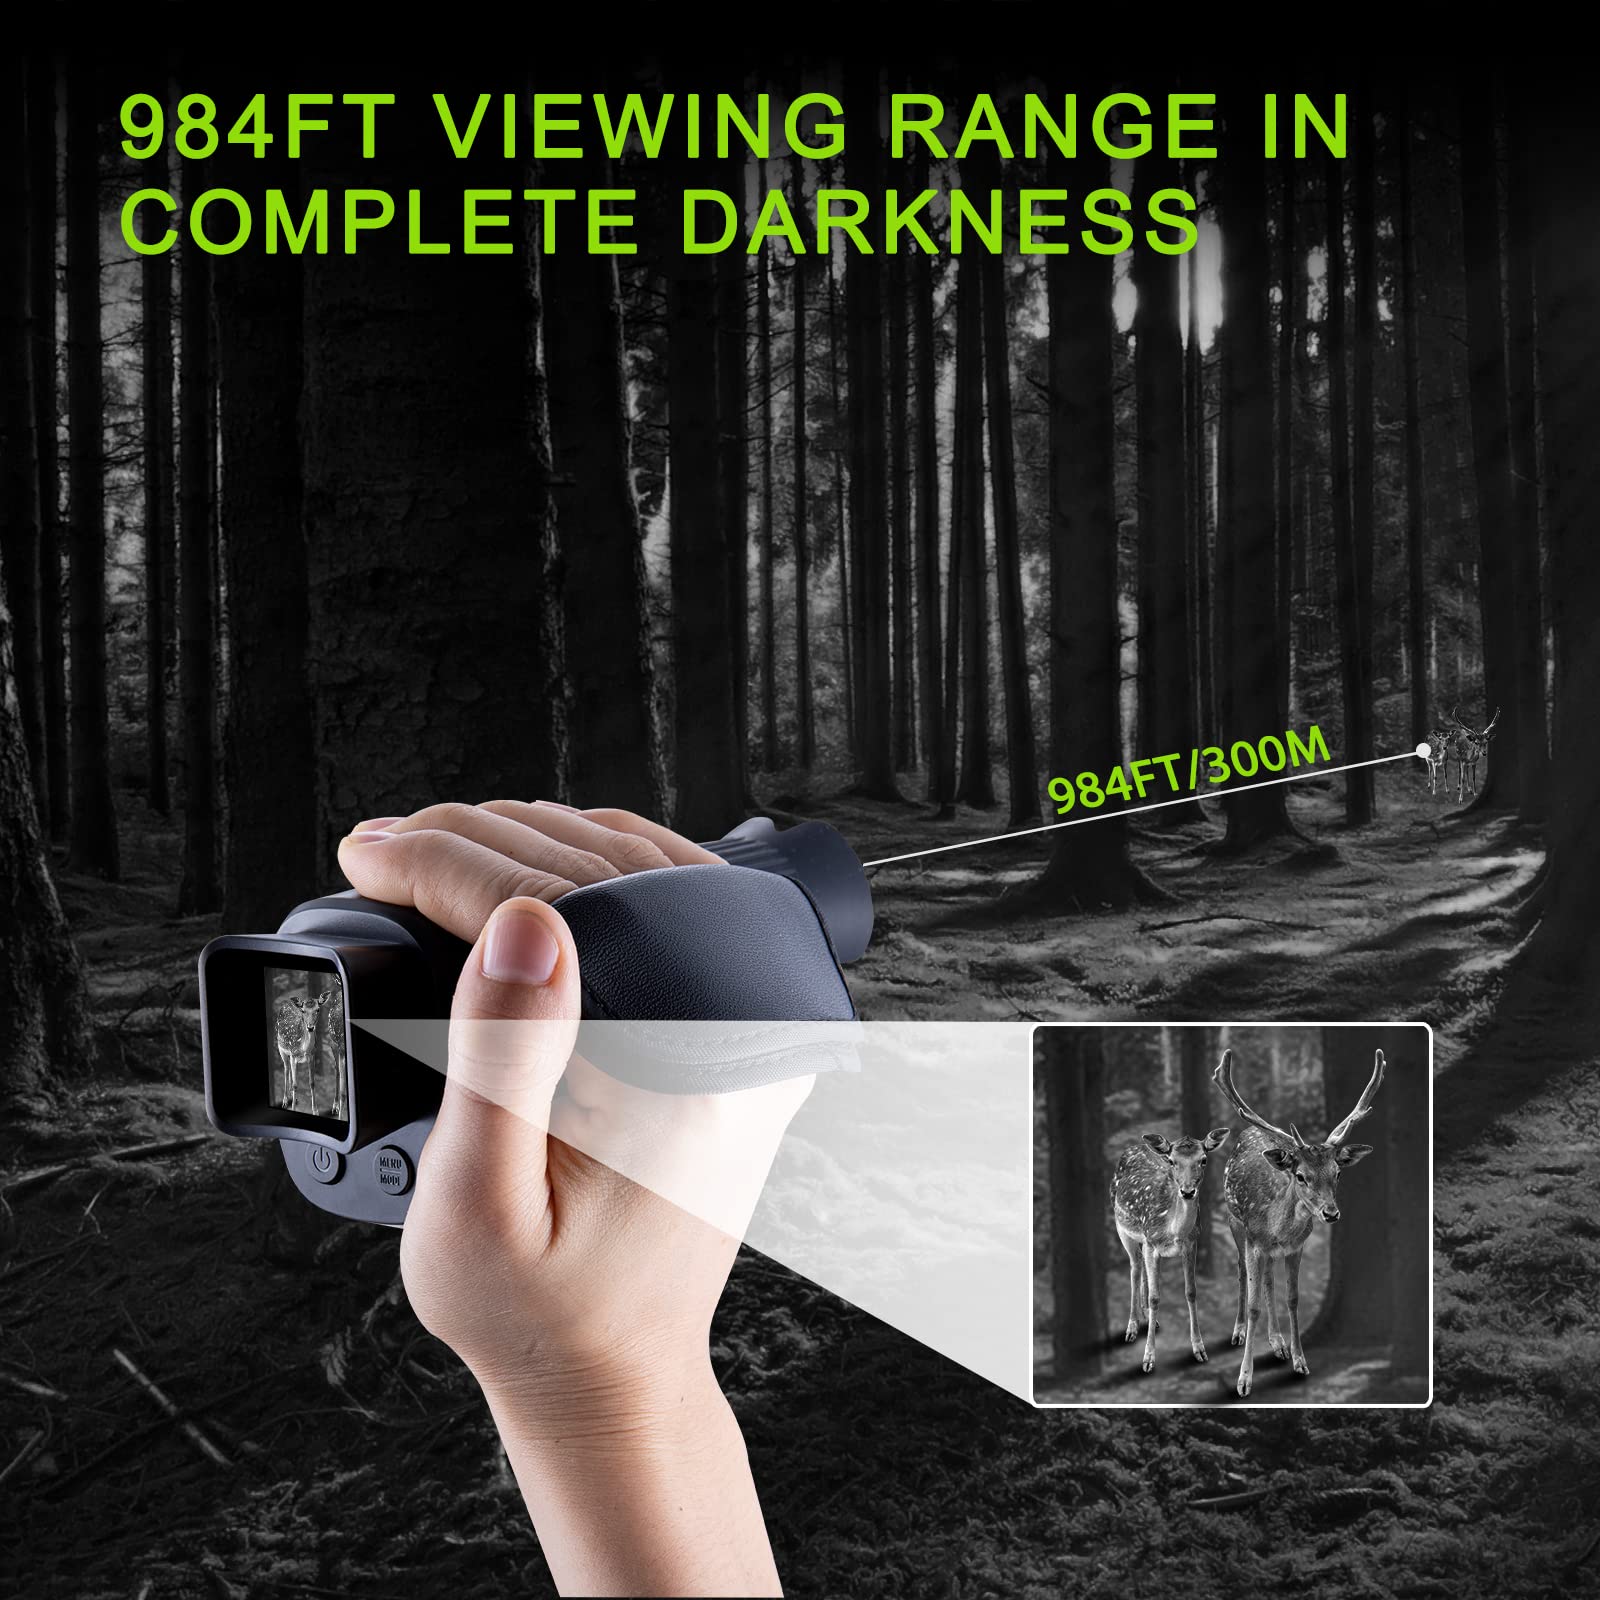 VABSCE Digital Night Vision Monocular for 100% Darkness, 1080p Full HD Video Long Distance Infrared Night Vision Goggles Binoculars for Hunting, Camping, Travel, Surveillance with 32 GB Micro SD Card